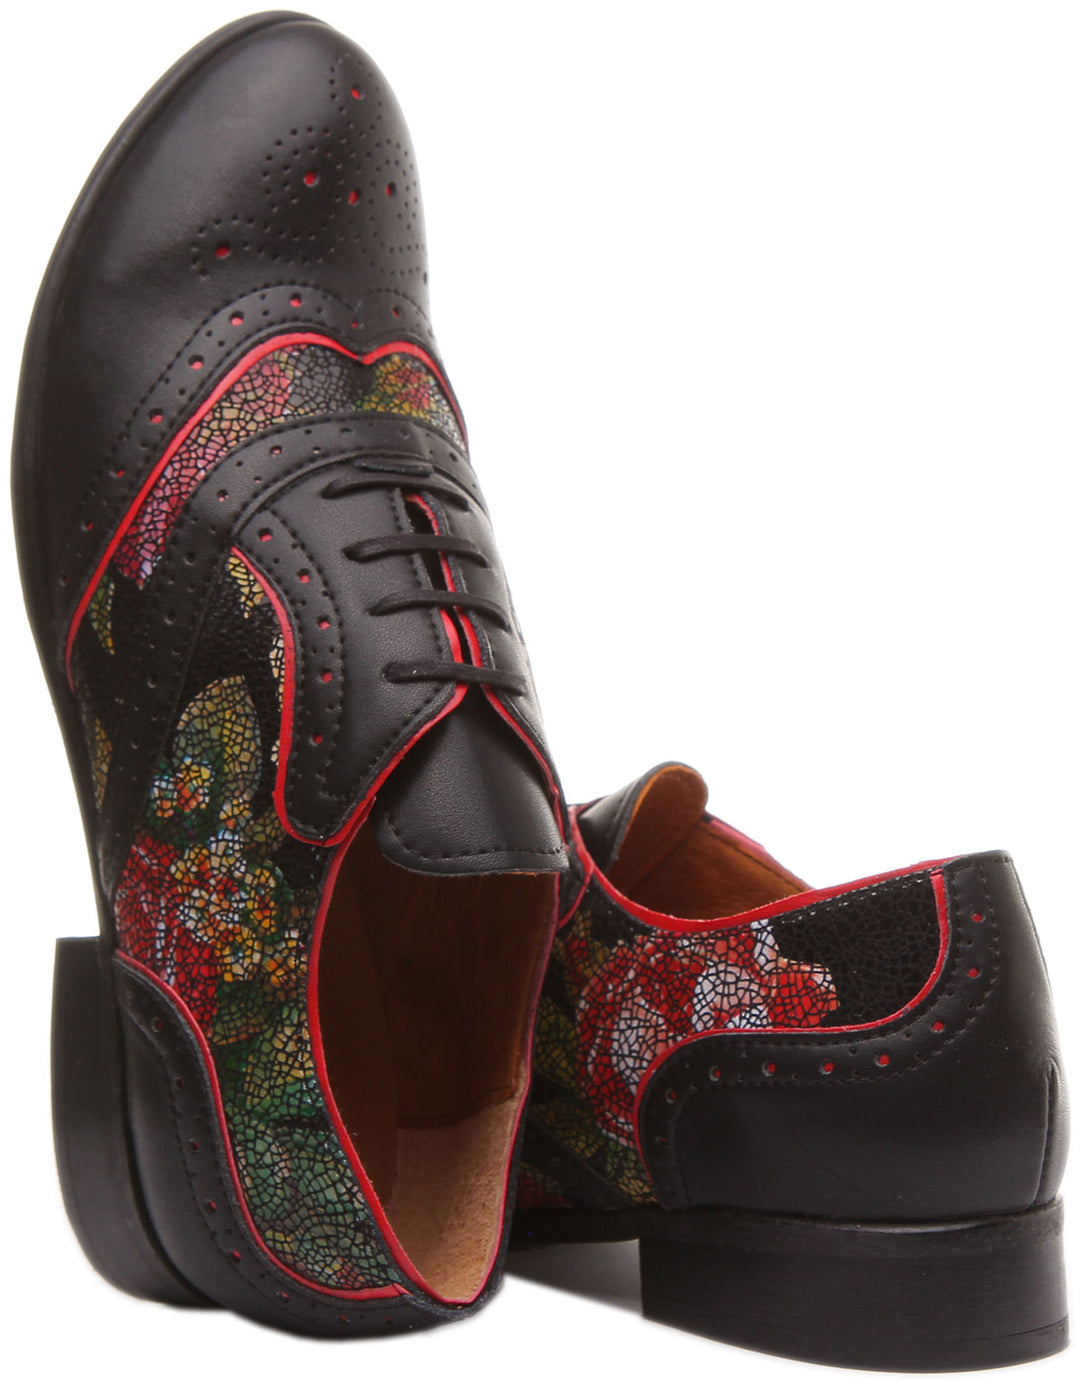 Roxana Lace up Soft Leather Brogue Shoes in Black Flower Print